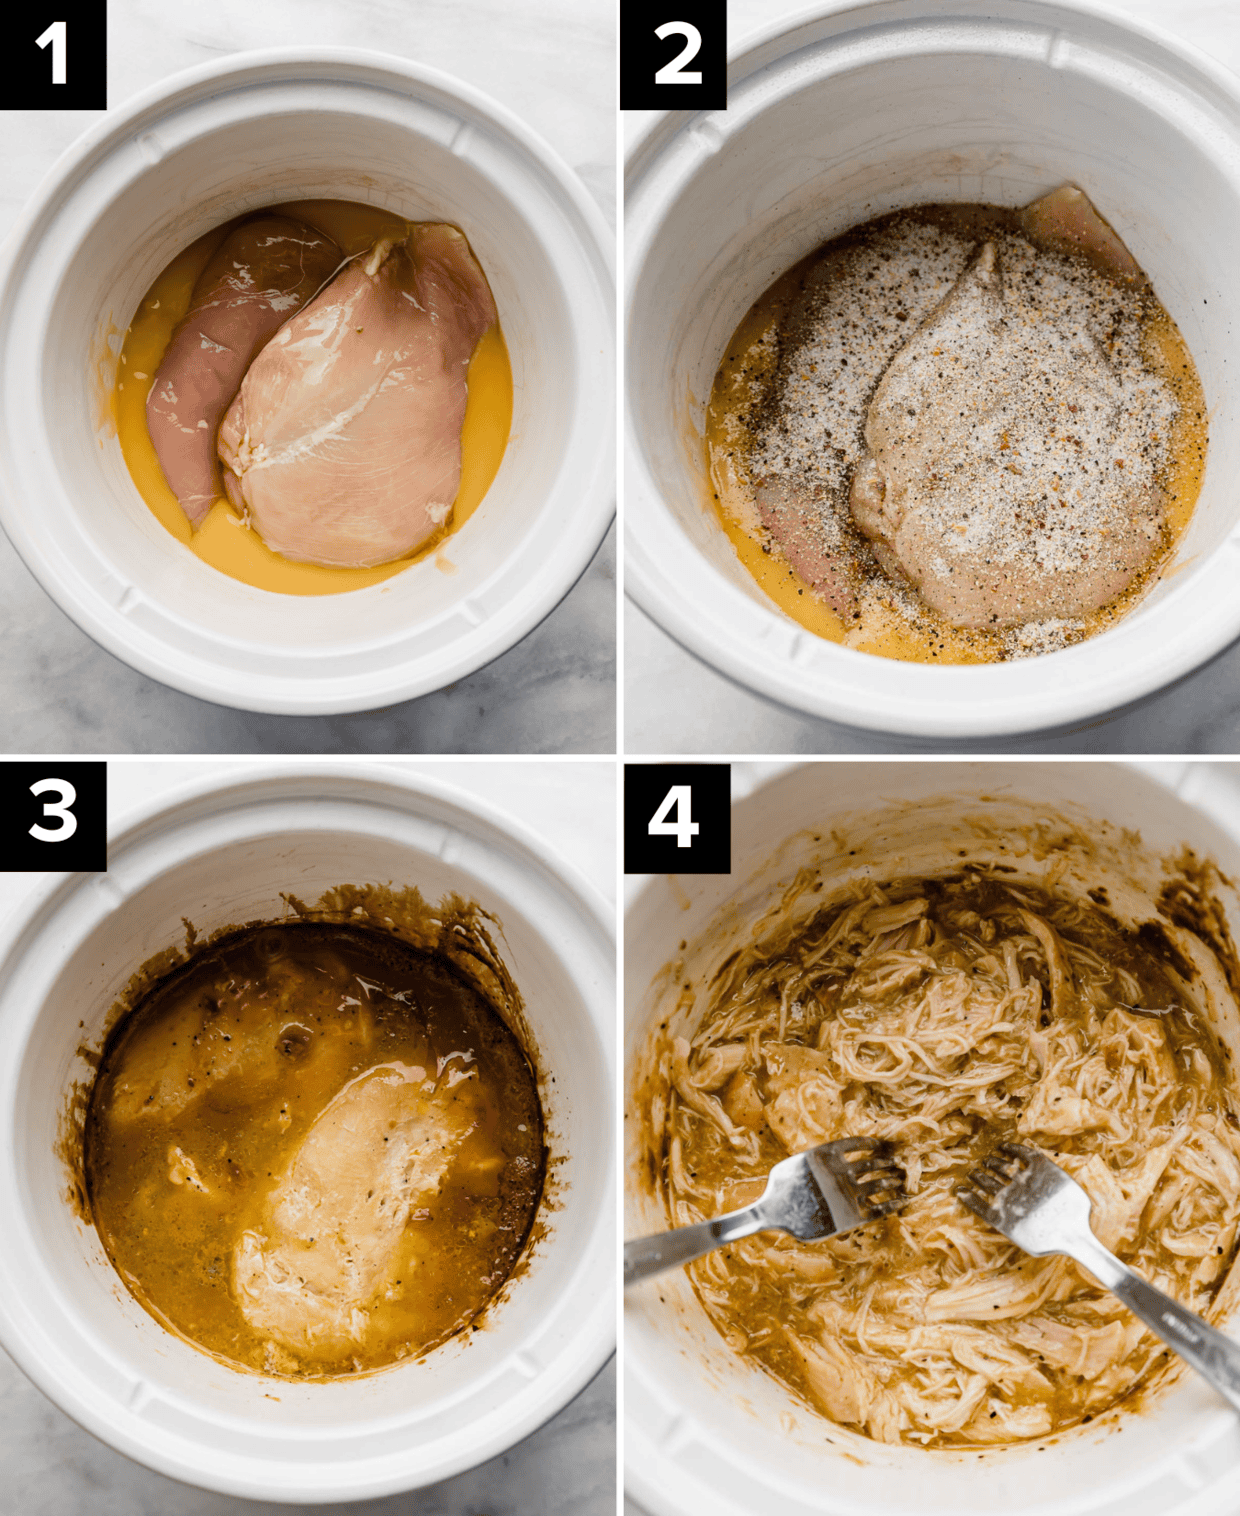 Four photos showing how to make Hawaiian Haystacks in the crockpot, first image is raw chicken in cream of chicken, then Good seasons mix overtop, then cooked, and then shredded chicken in the crockpot.